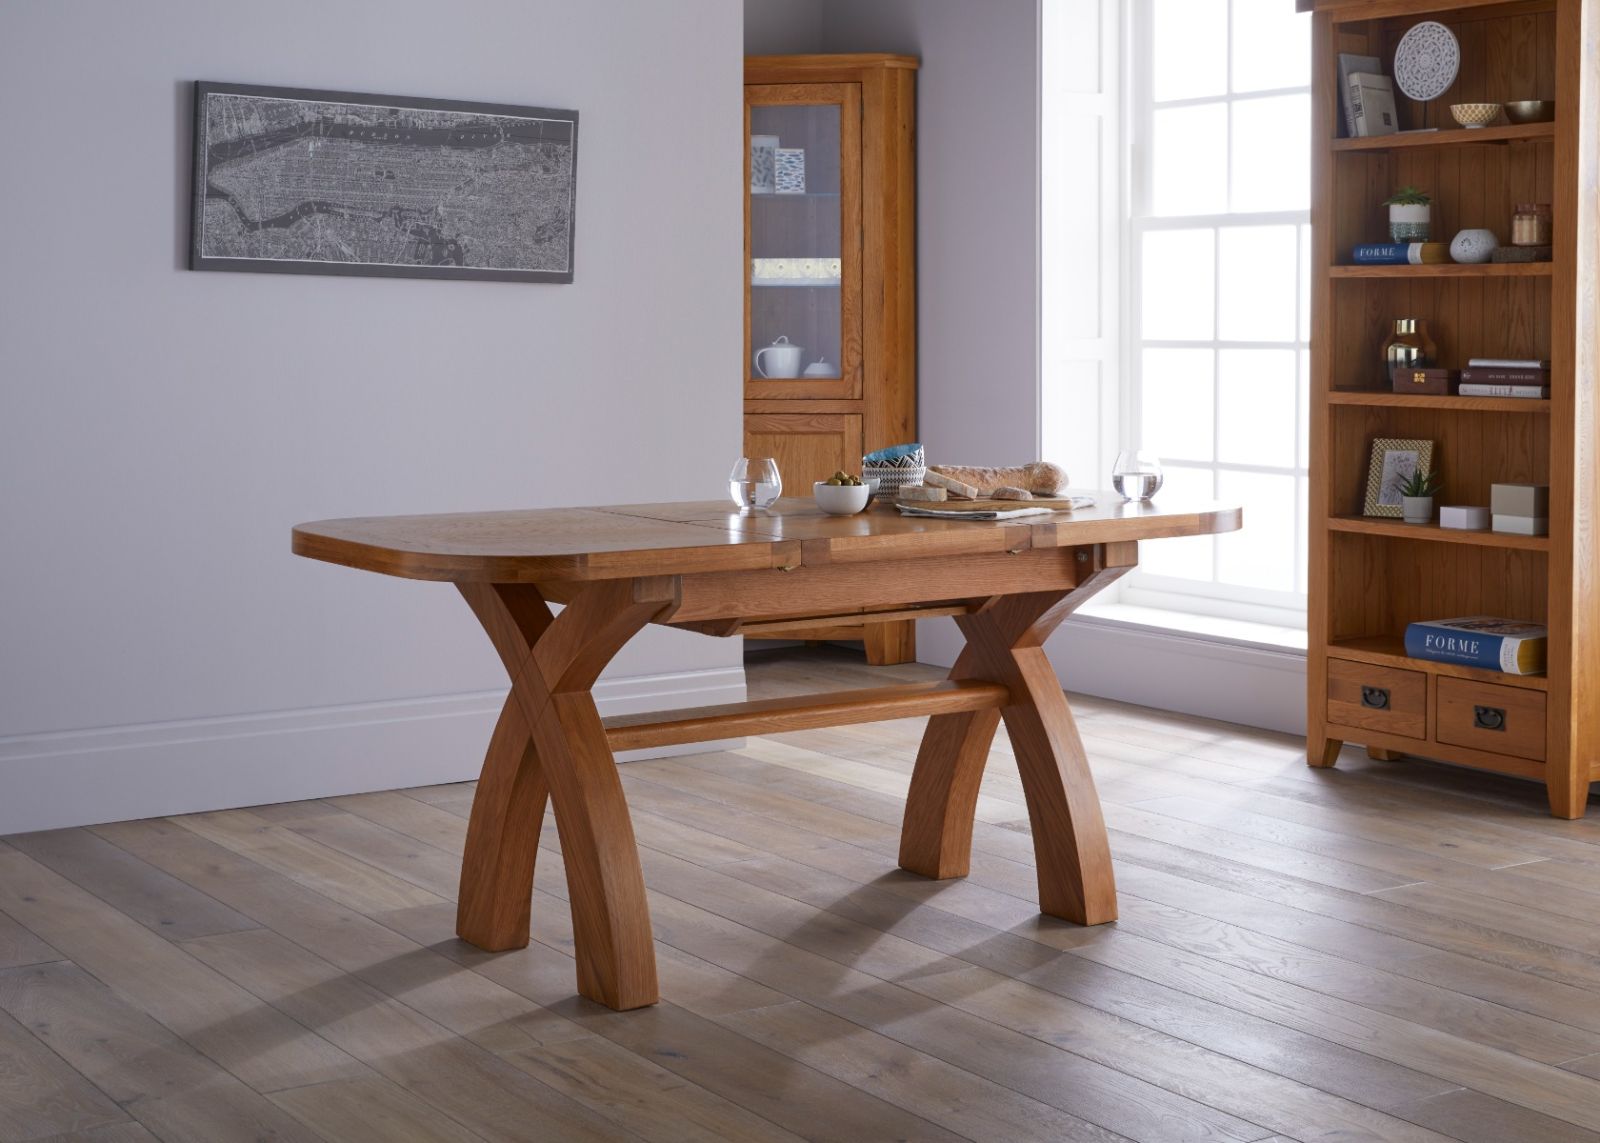 130cm to 180cm Country Oak X Leg Butterfly Extending Table Oval Corners - 10% OFF WINTER SALE